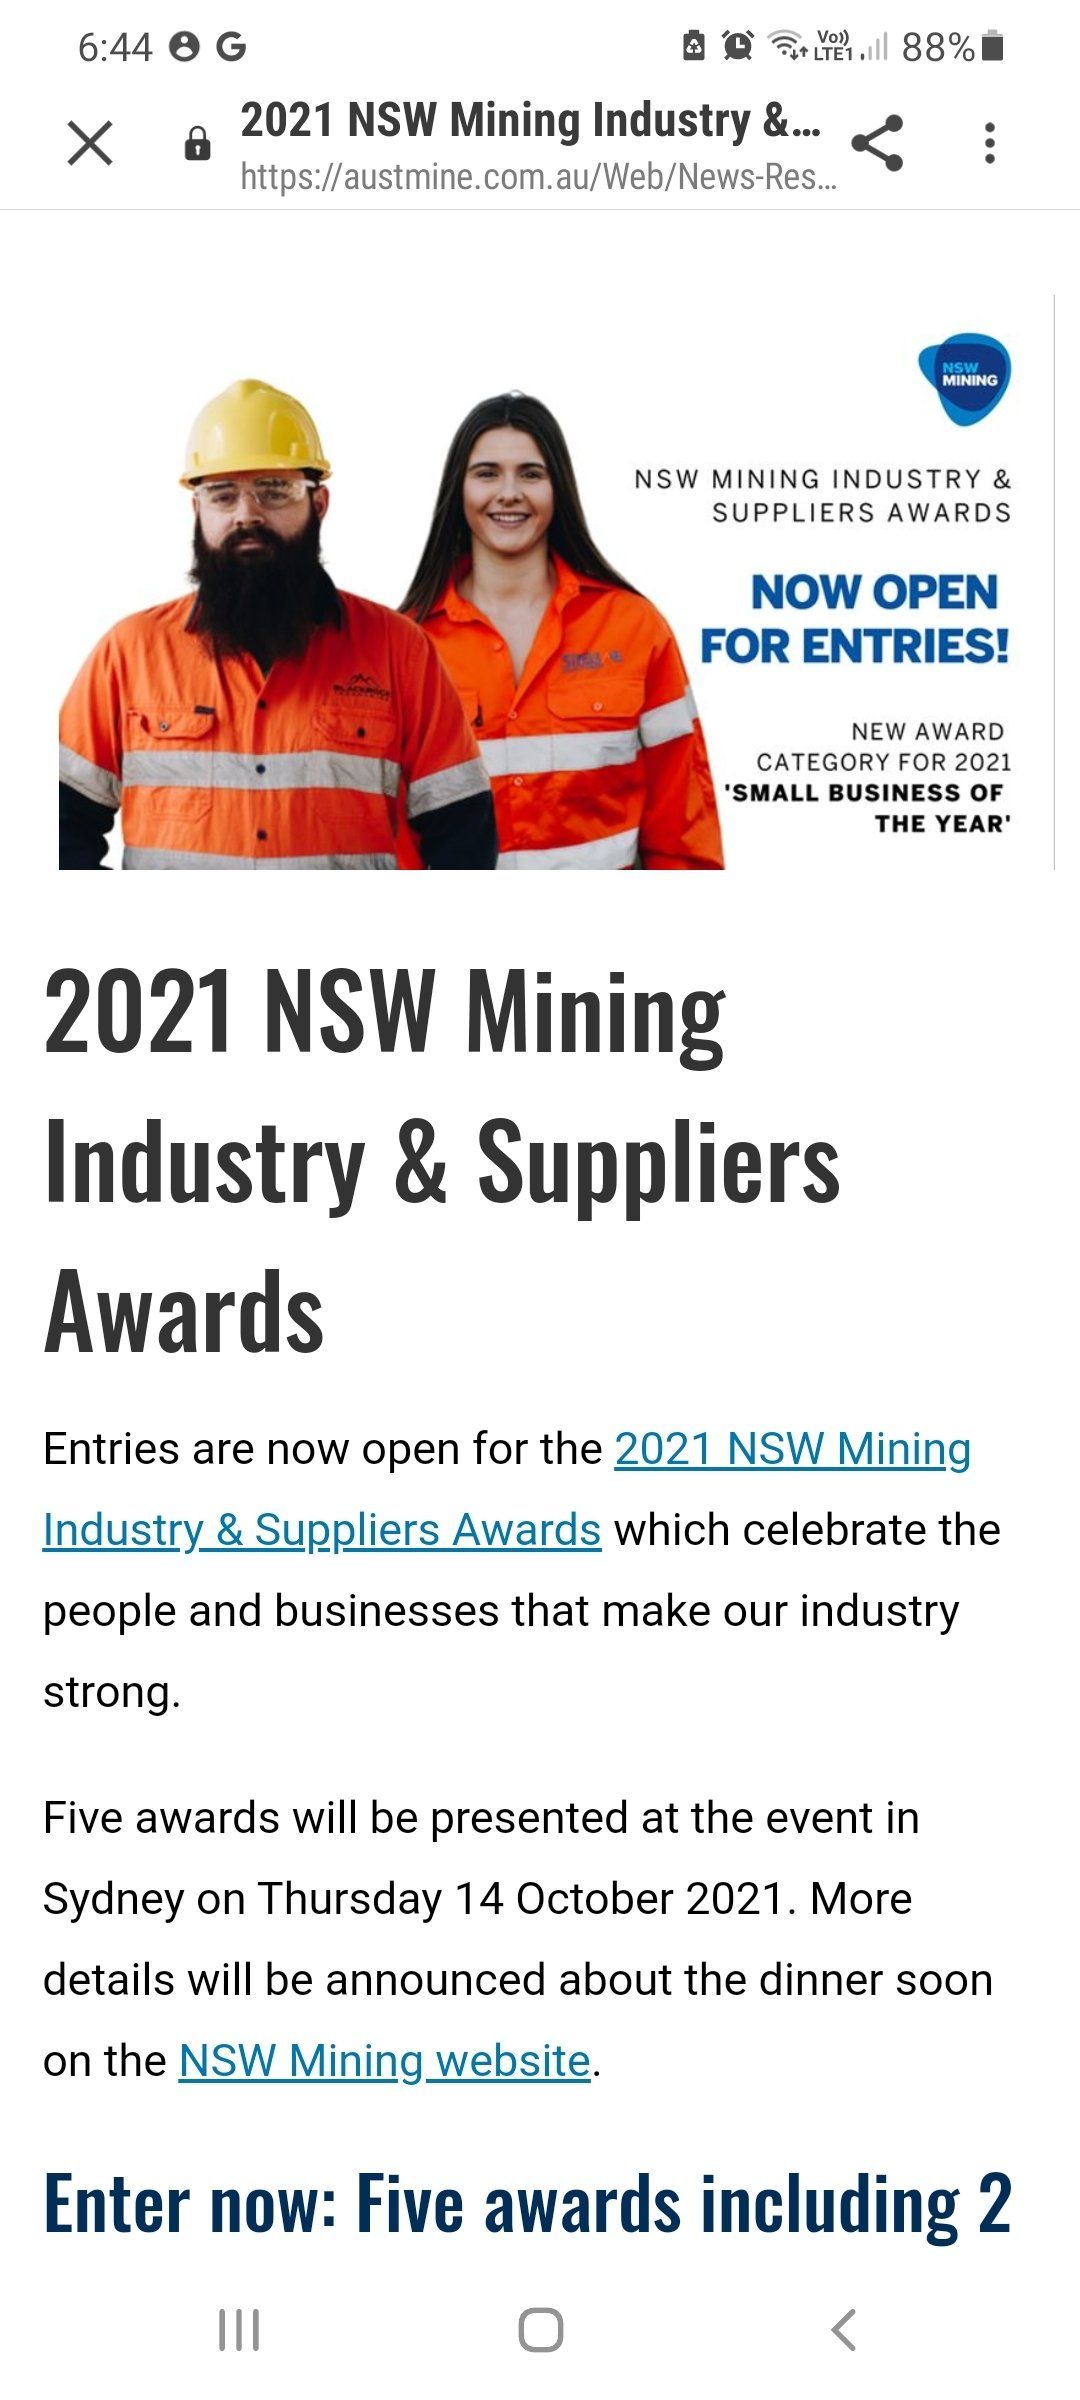 2021 NSW Mining Industry & Suppliers Awards